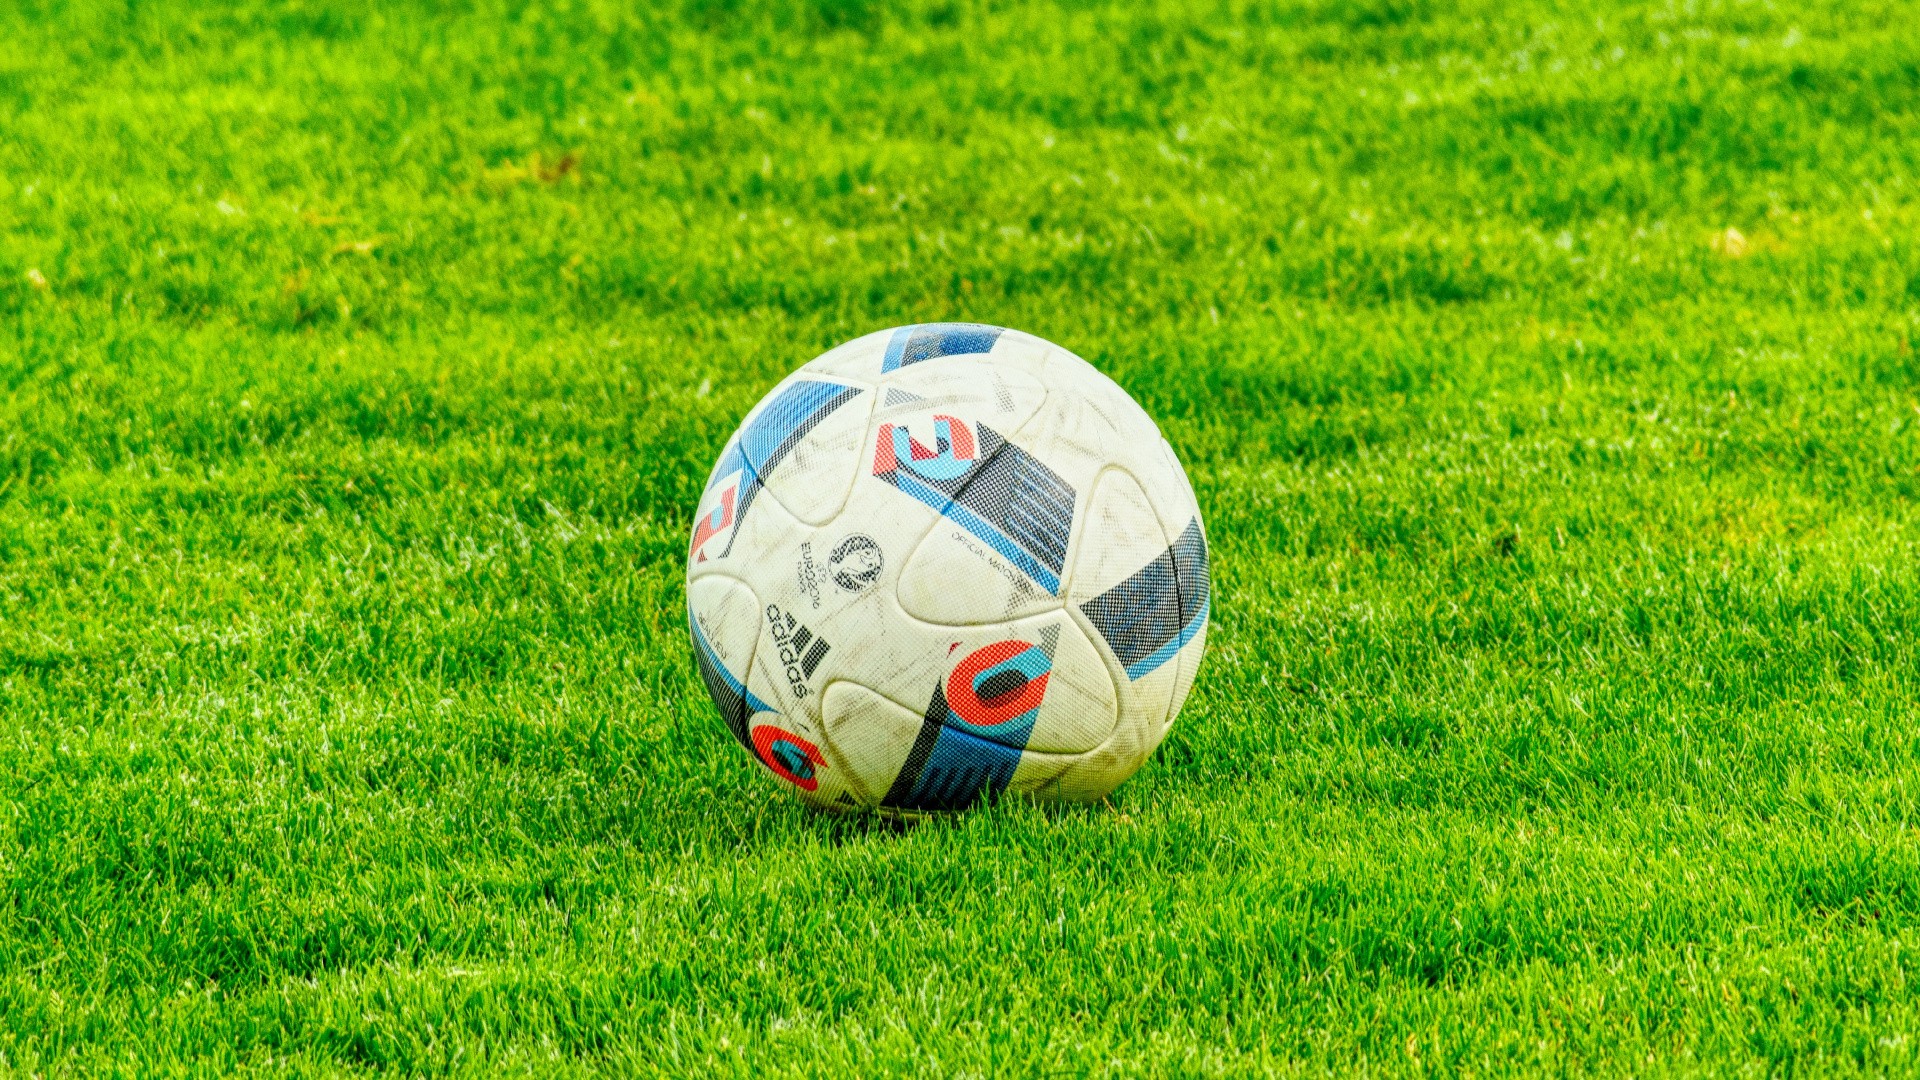 White Soccer Ball on Green Grass Field During Daytime. Wallpaper in 1920x1080 Resolution